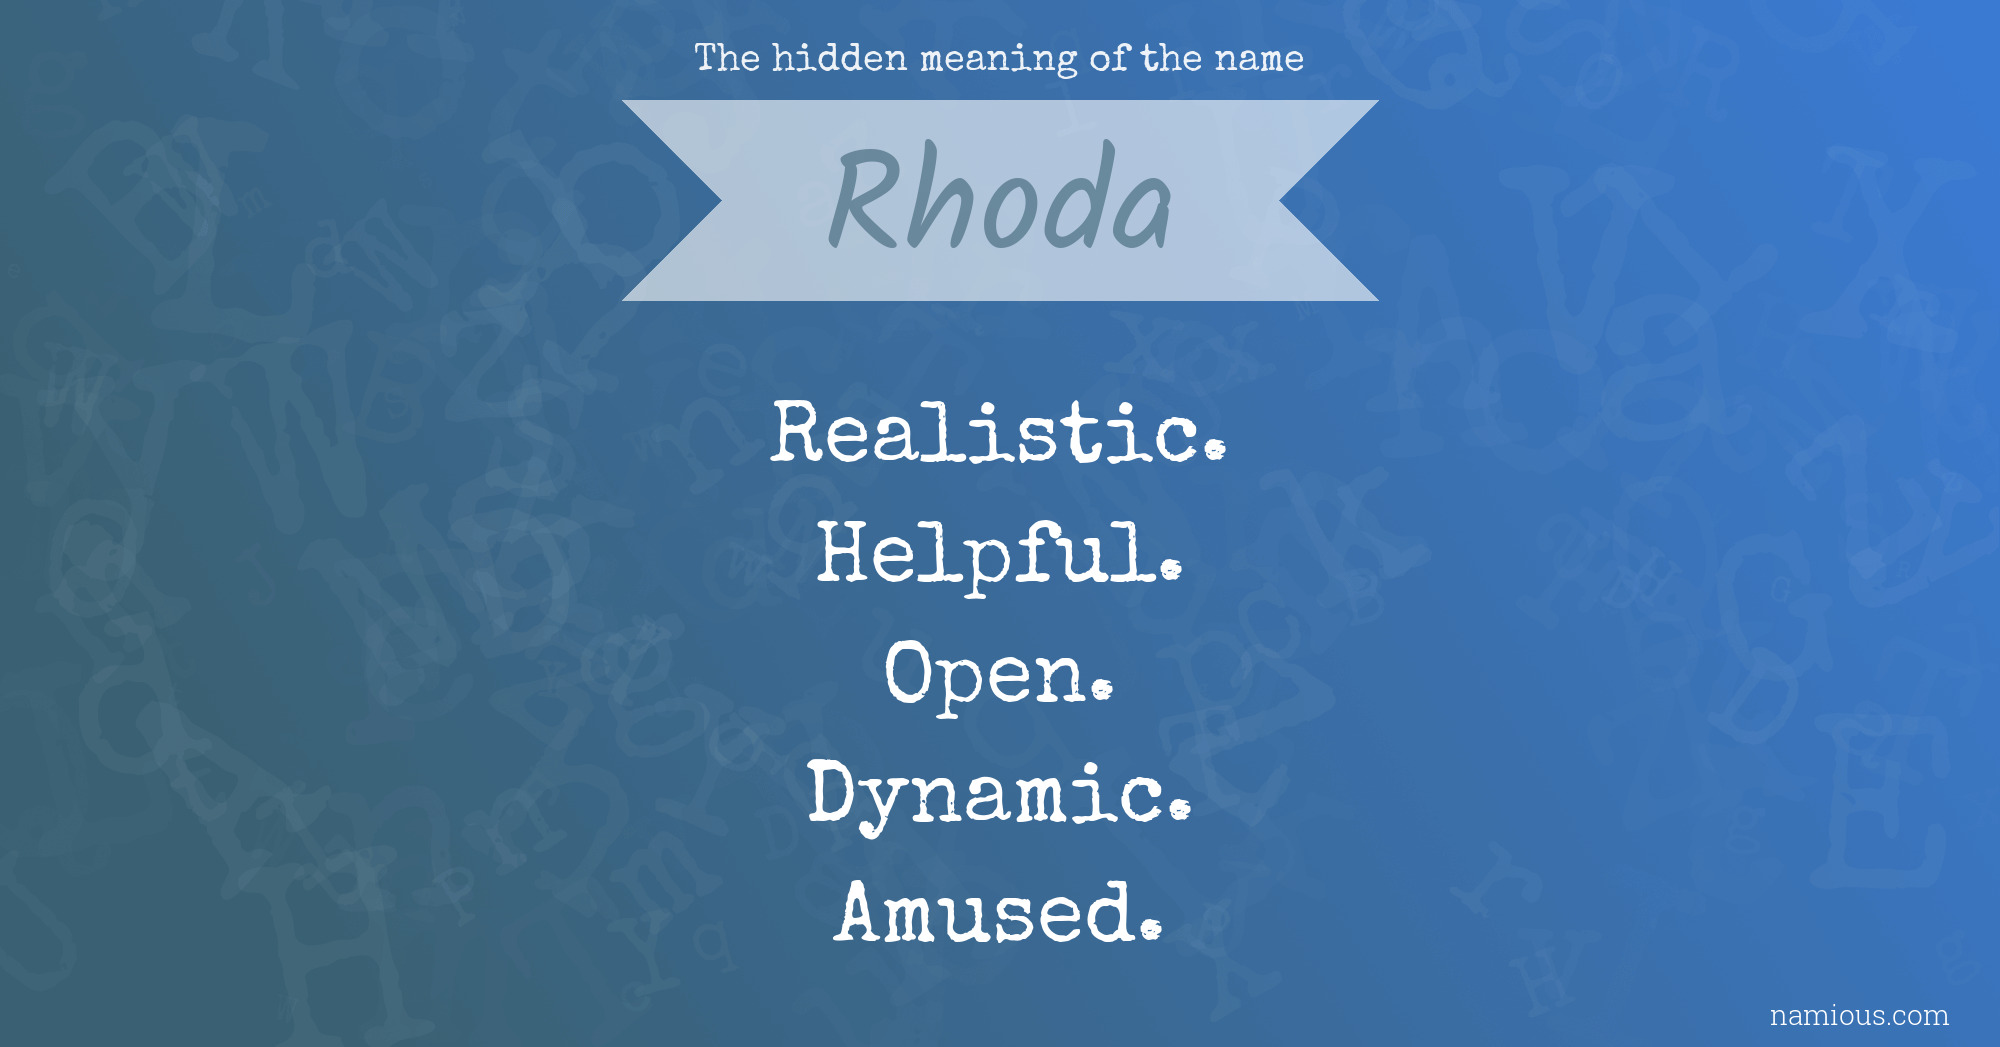 The hidden meaning of the name Rhoda